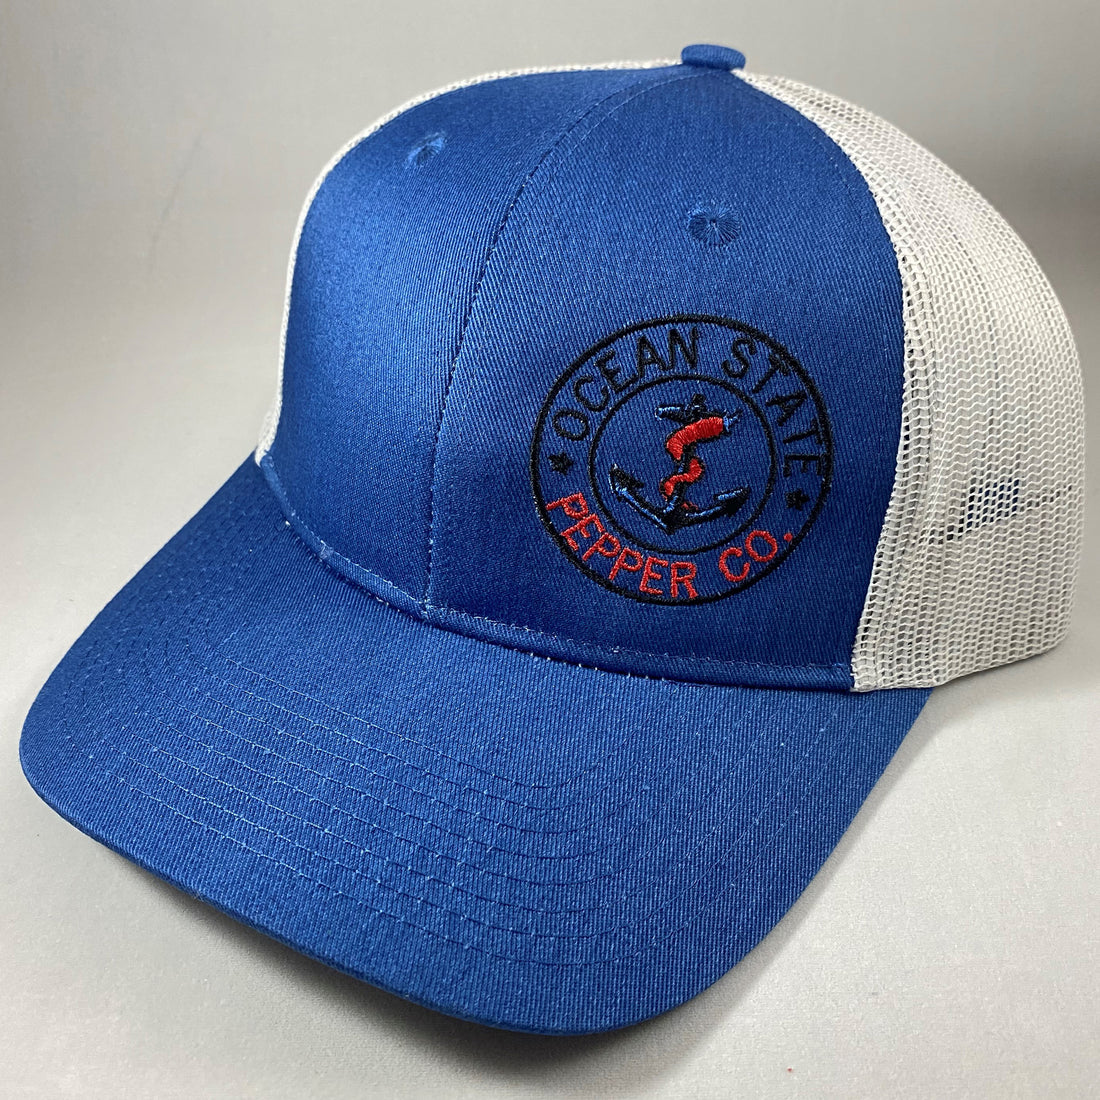 OSPC Trucker Hat - Apparel for Chili Heads – Ocean State Pepper Co.